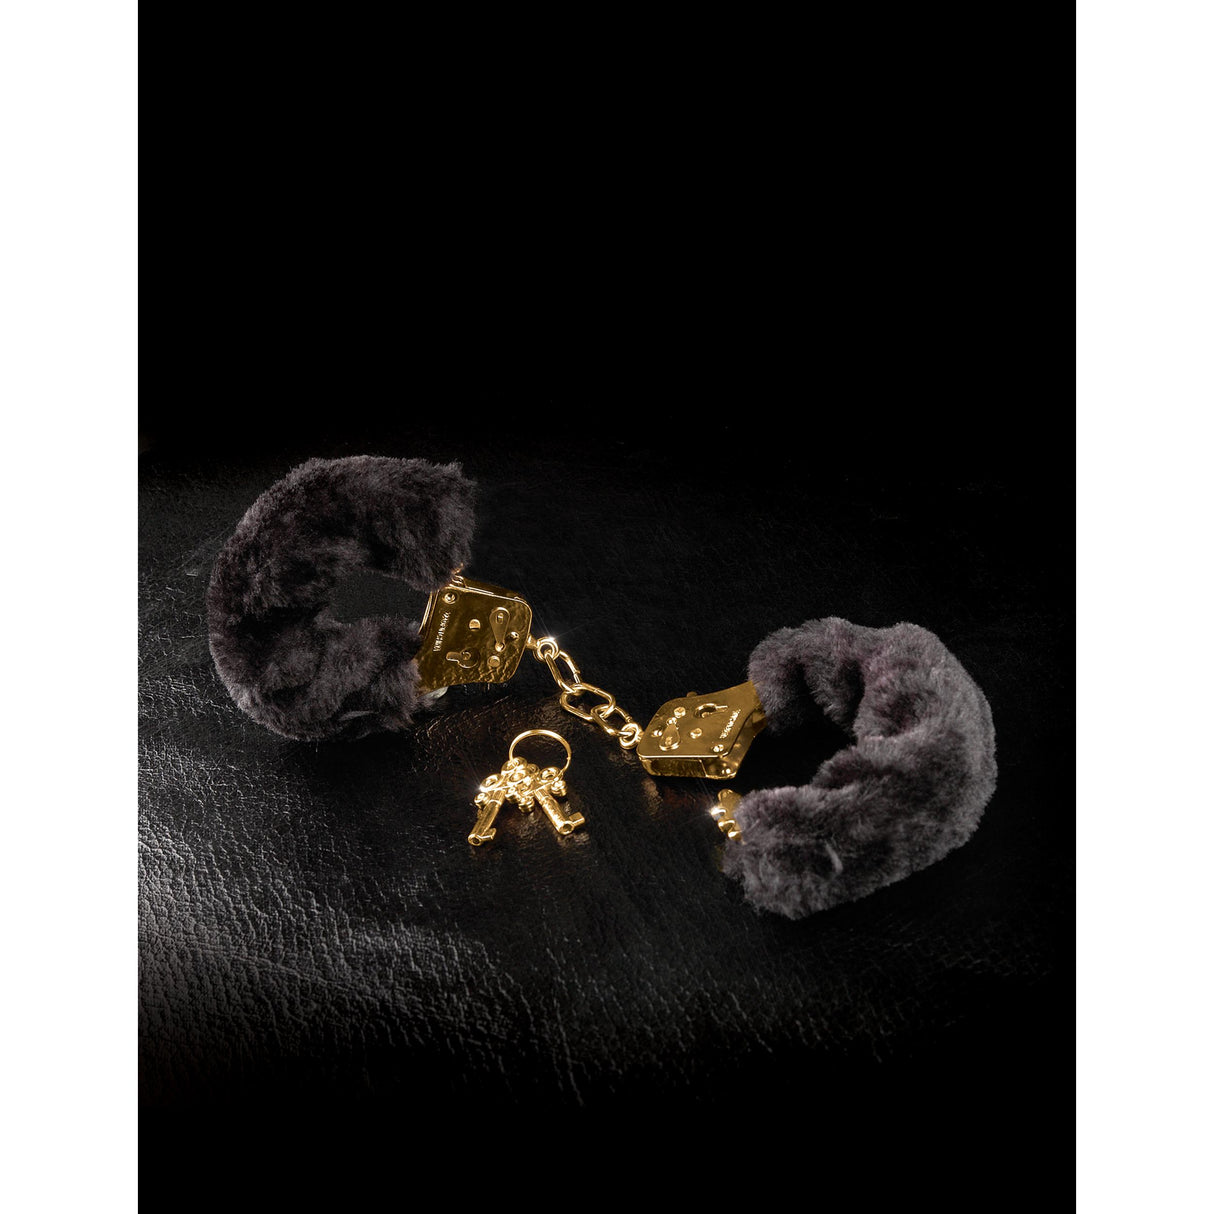 Fetish Fantasy Gold Deluxe Furry Cuffs